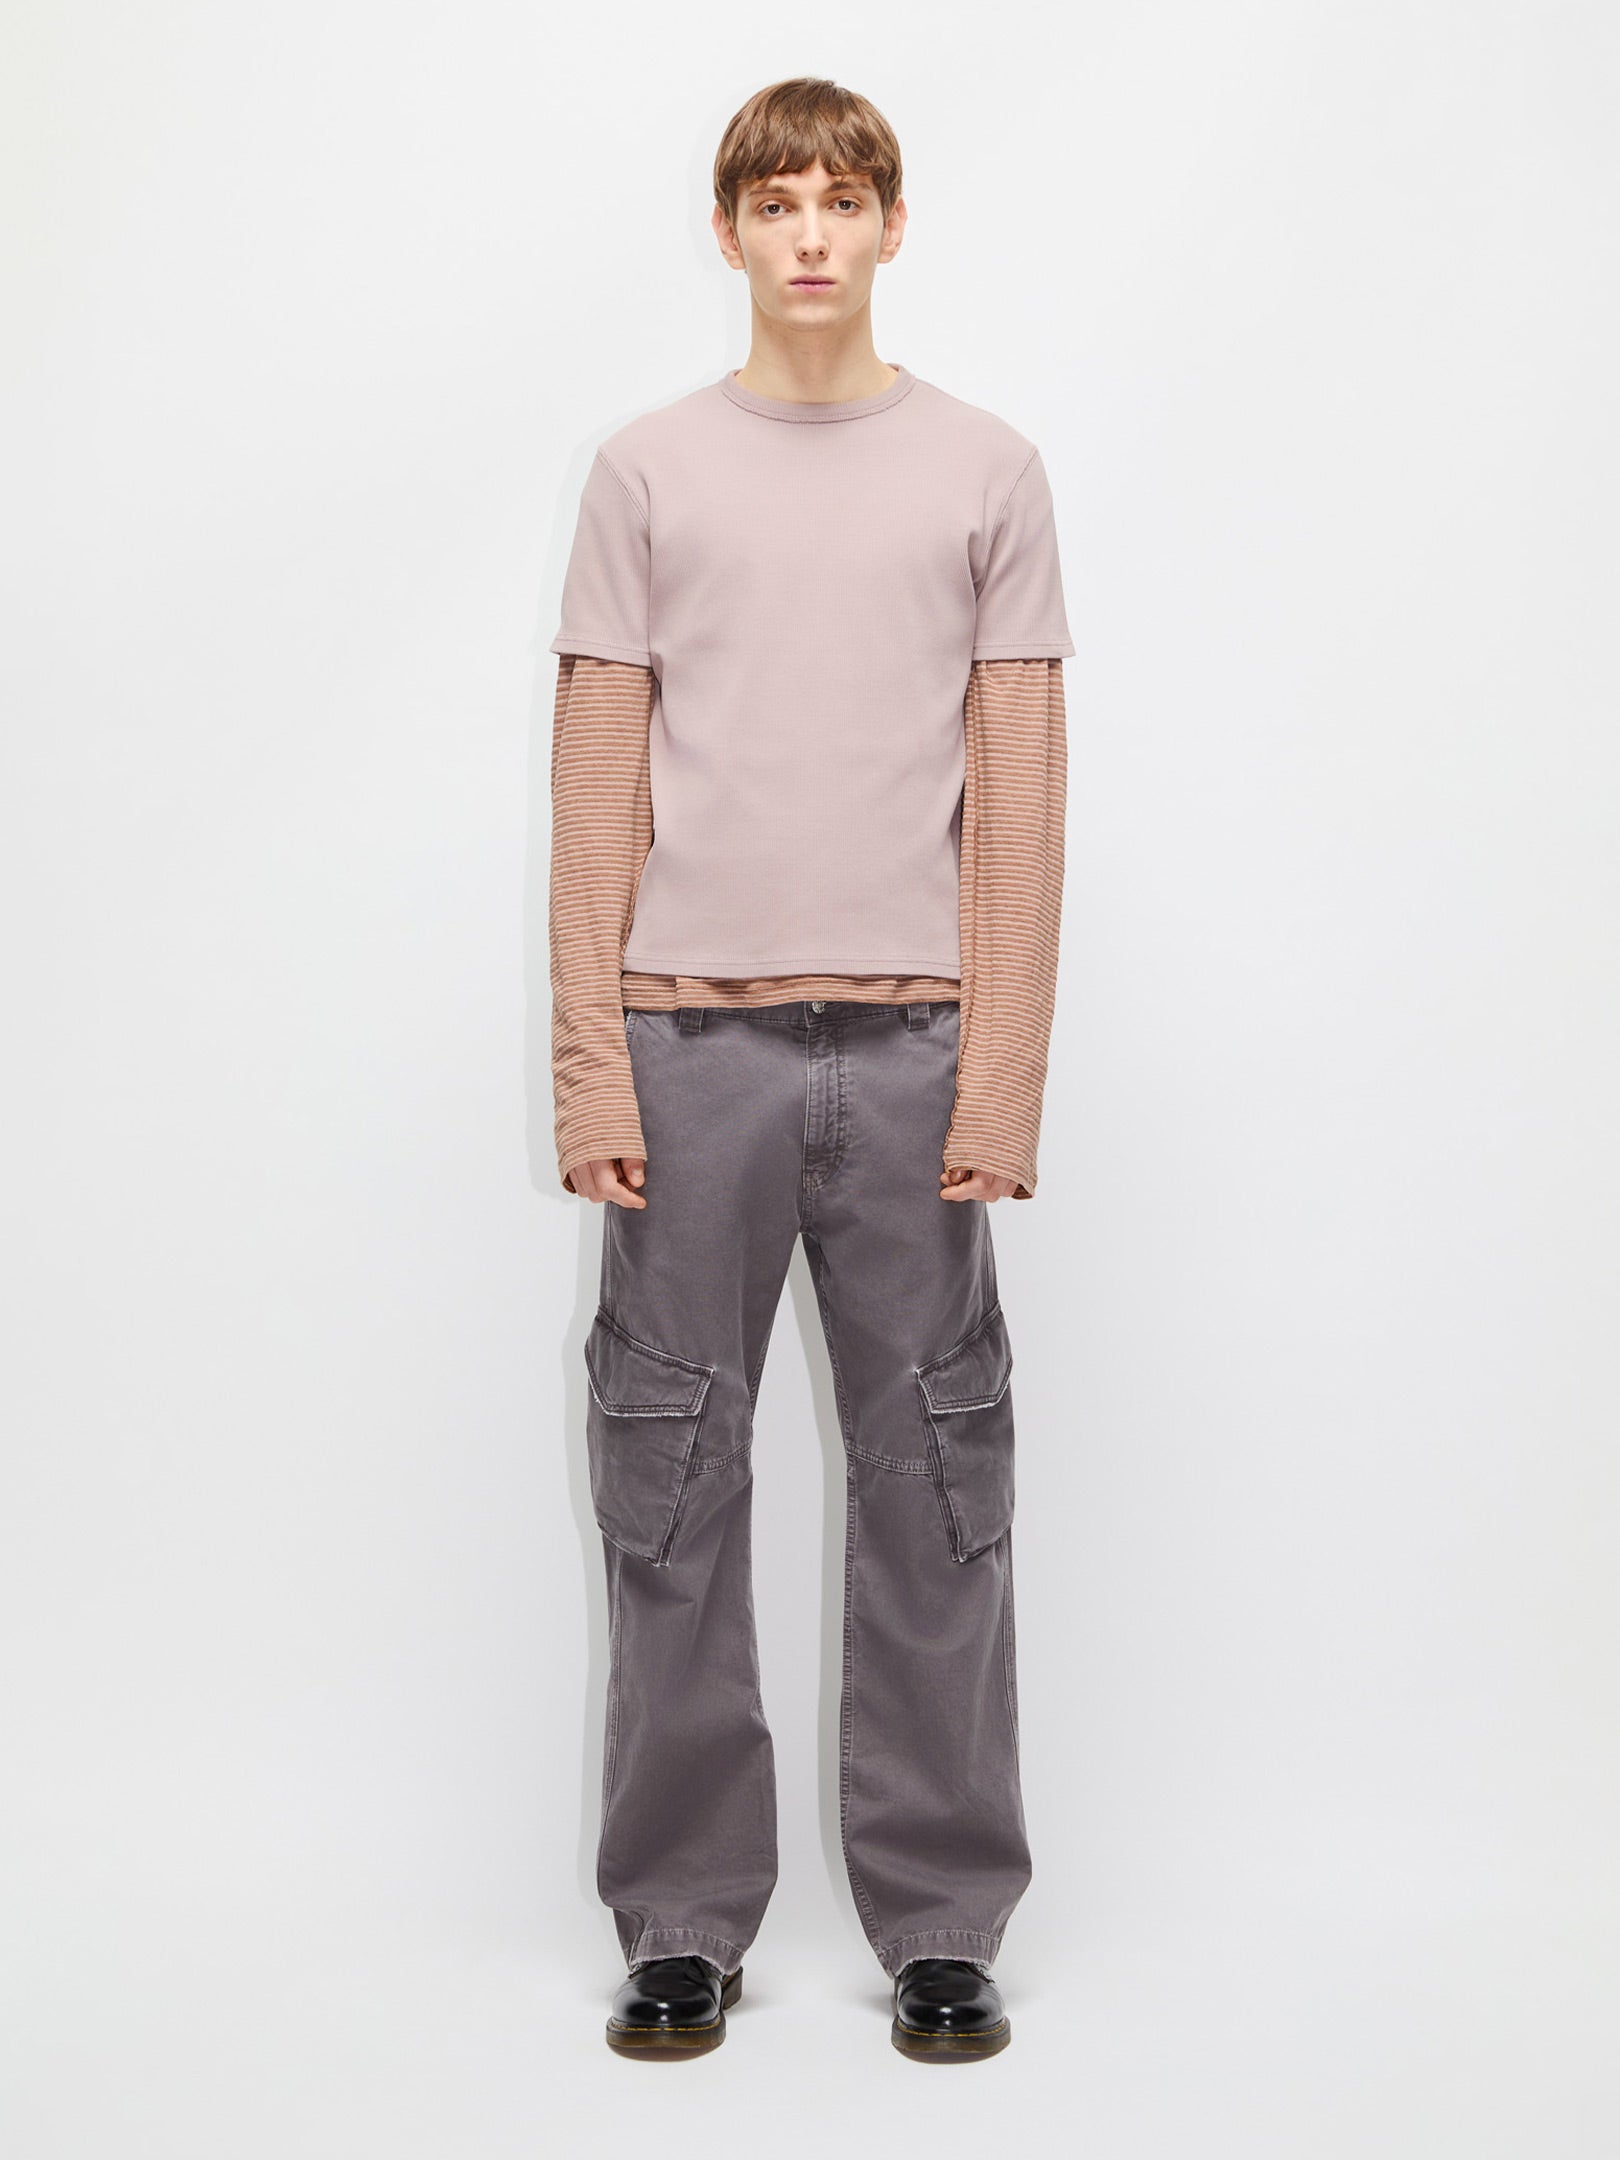 The-Lair-HOPE-Rush-Cargo-Trousers-GreyThe-Lair-HOPE-Rush-Cargo-Trousers-Grey